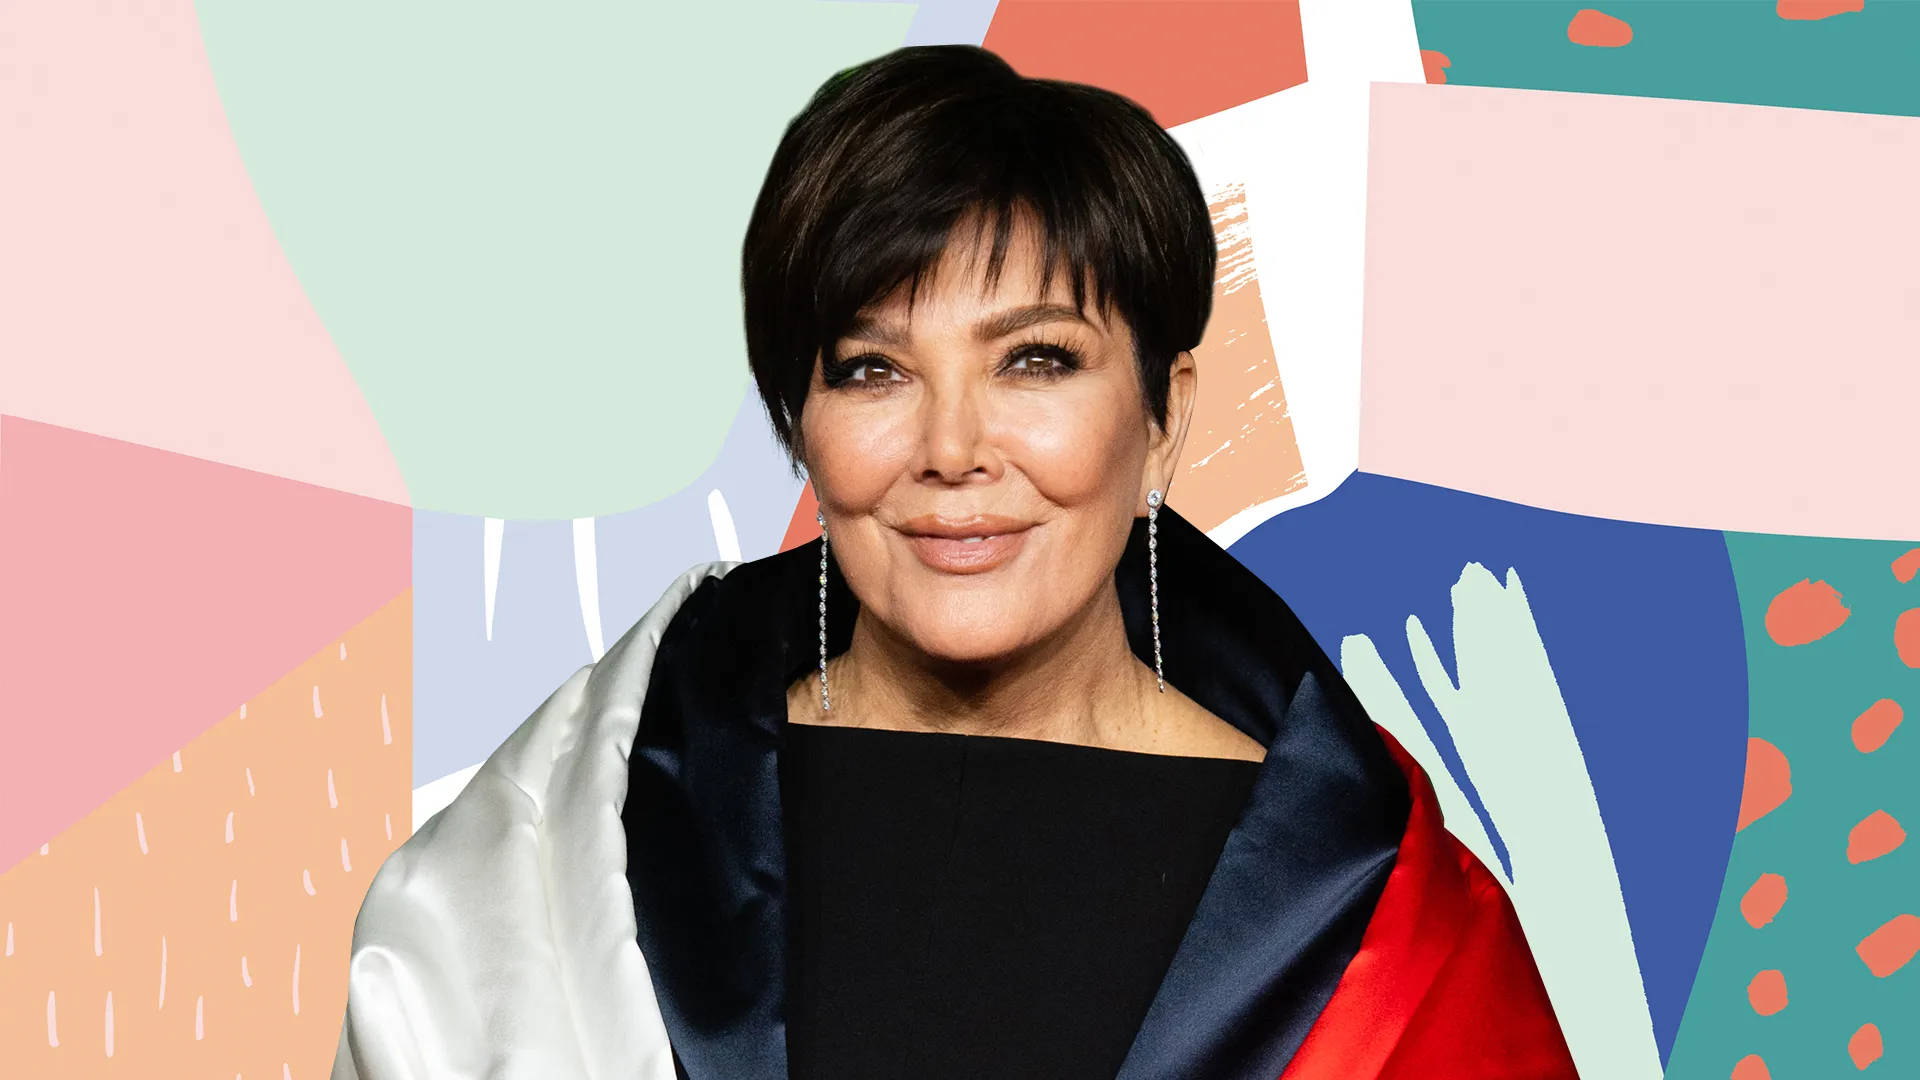 Kris Jenner Multi-Colored Outfit Wallpaper